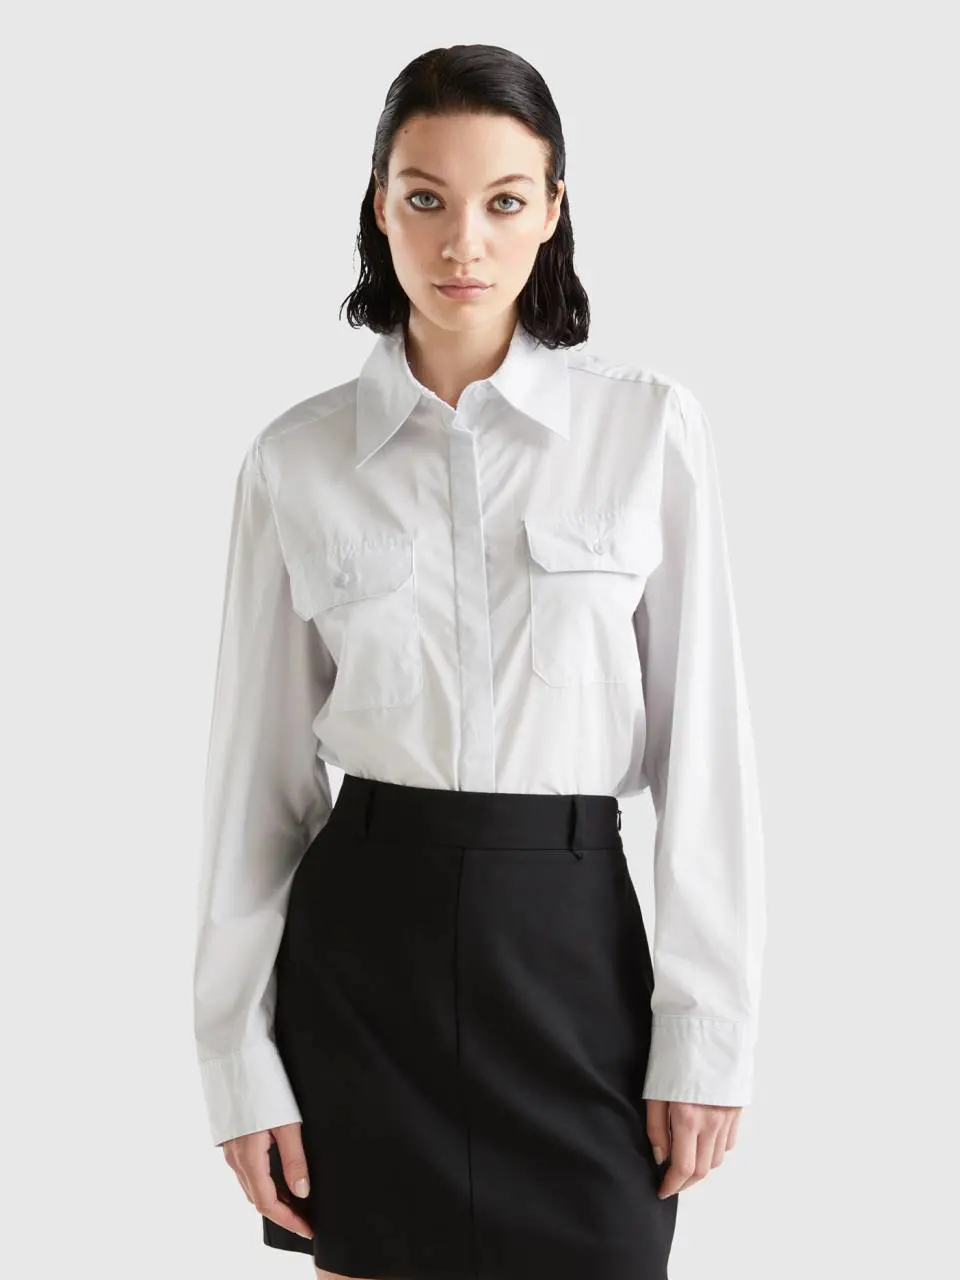 Benetton shirt with pockets and slits. 1